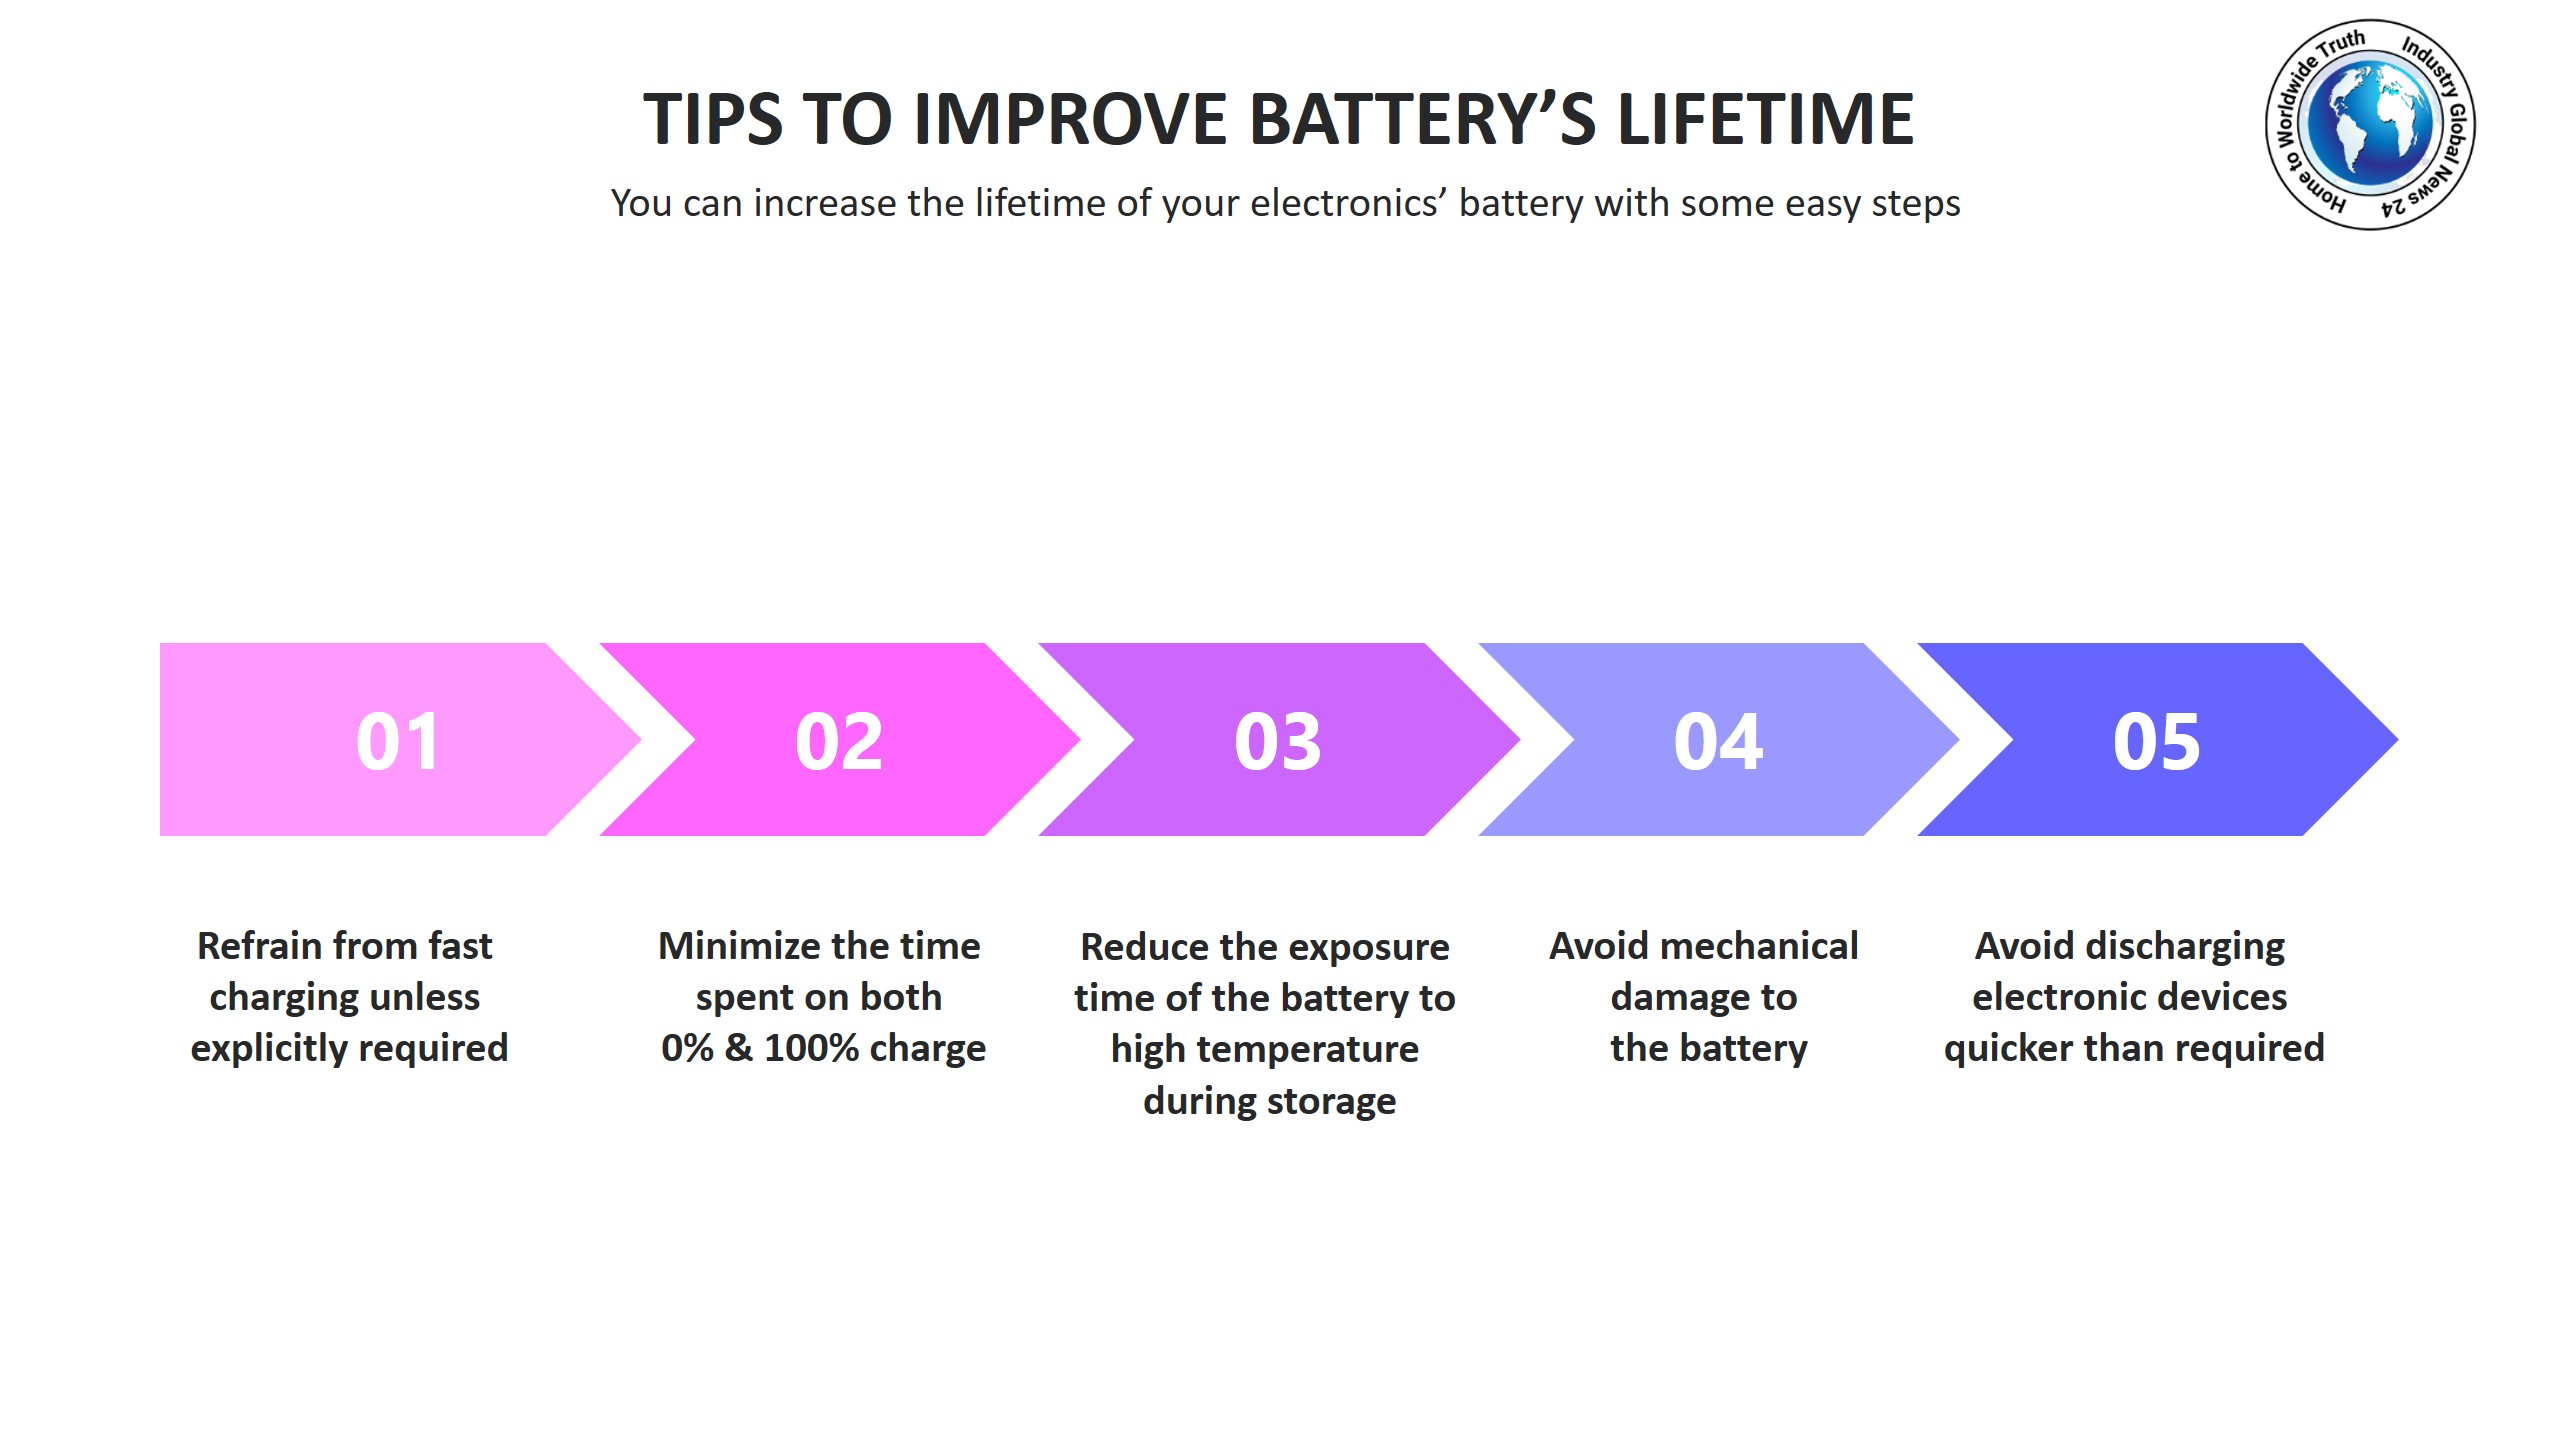 Tips to improve battery’s lifetime